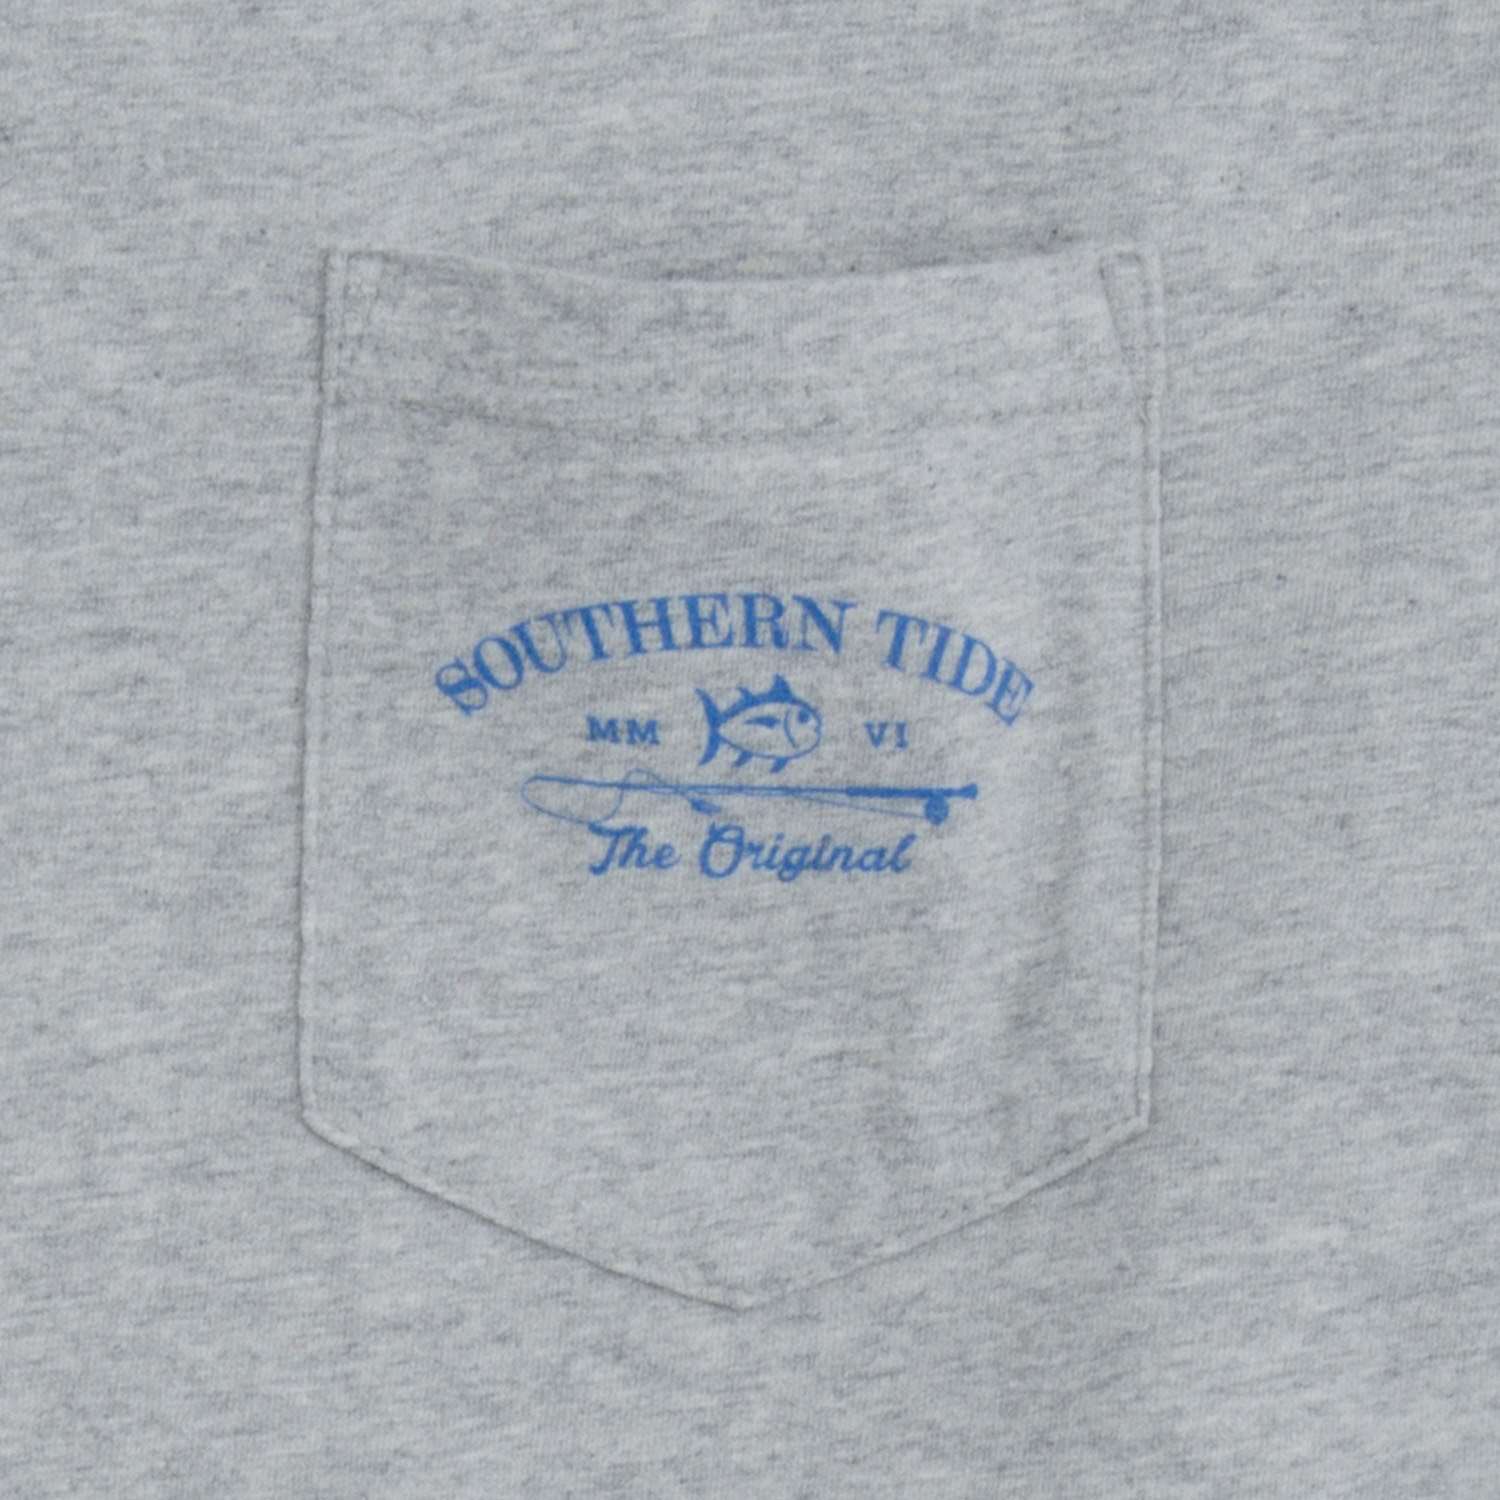 Long Sleeve Original Boathouse Tee in Heathered Grey by Southern Tide - Country Club Prep